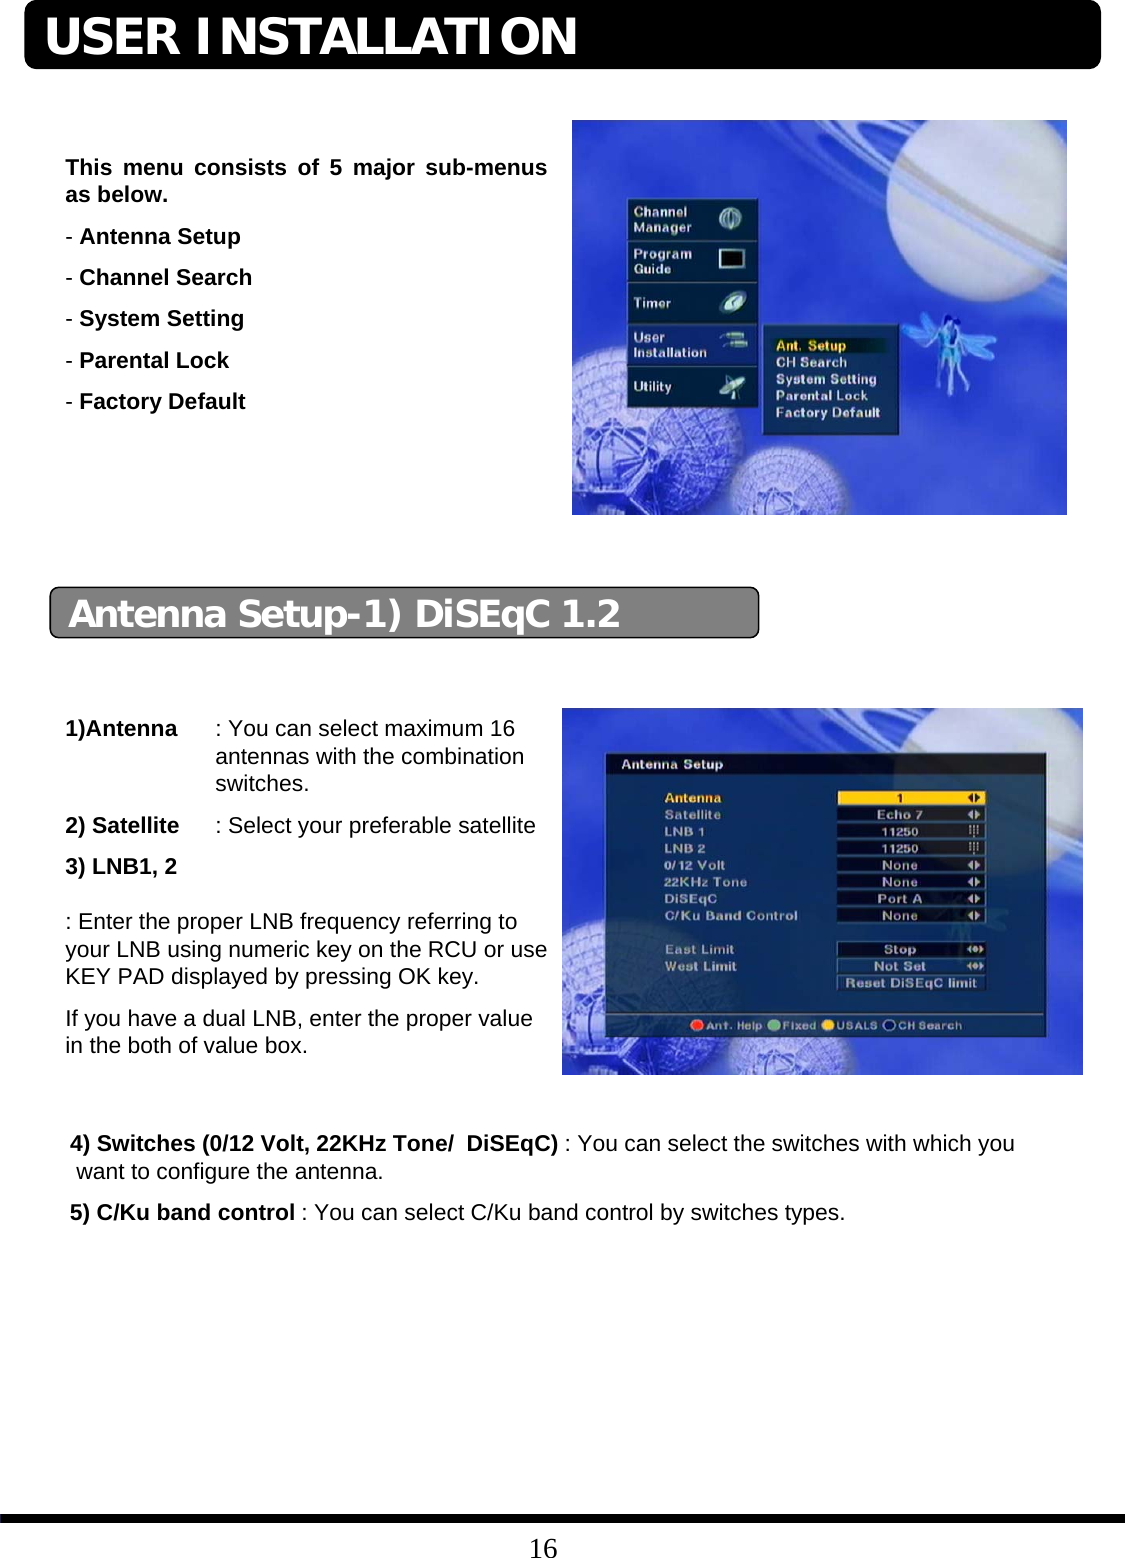 16This menu consists of 5 major sub-menus as below.-Antenna Setup-Channel Search-System Setting-Parental Lock-Factory DefaultAntenna Setup-1) DiSEqC 1.21)Antenna : You can select maximum 16 antennas with the combination switches.2) Satellite : Select your preferable satellite3) LNB1, 2: Enter the proper LNB frequency referring to your LNB using numeric key on the RCU or use KEY PAD displayed by pressing OK key.If you have a dual LNB, enter the proper value in the both of value box.USER INSTALLATION4) Switches (0/12 Volt, 22KHz Tone/  DiSEqC) : You can select the switches with which youwant to configure the antenna.5) C/Ku band control : You can select C/Ku band control by switches types.